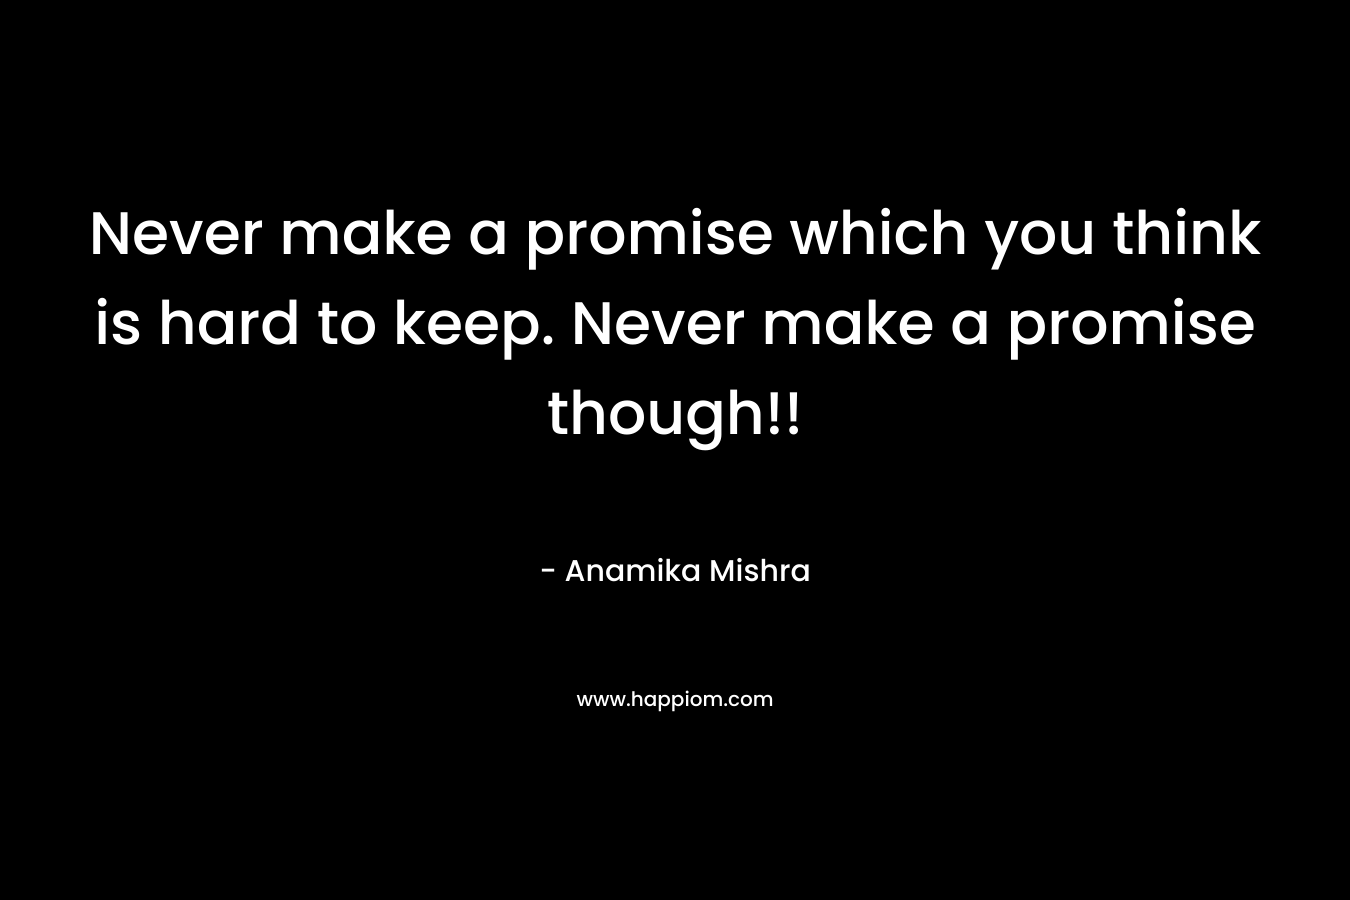 Never make a promise which you think is hard to keep. Never make a promise though!!